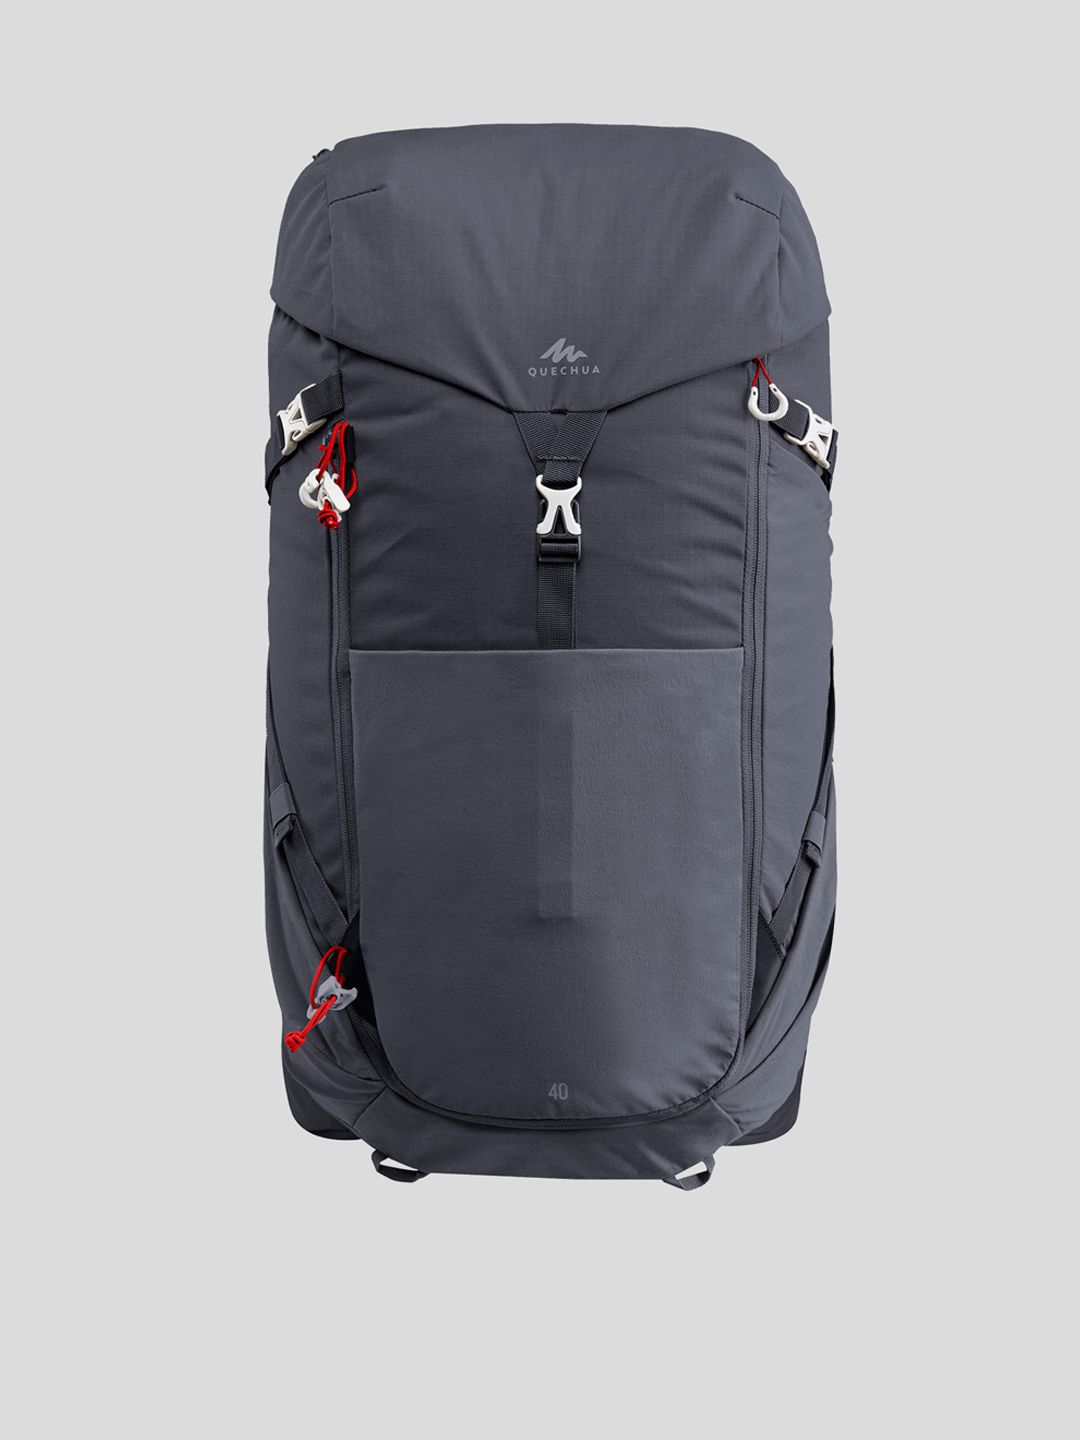 Quechua By Decathlon Unisex Black Solid Backpack Price in India